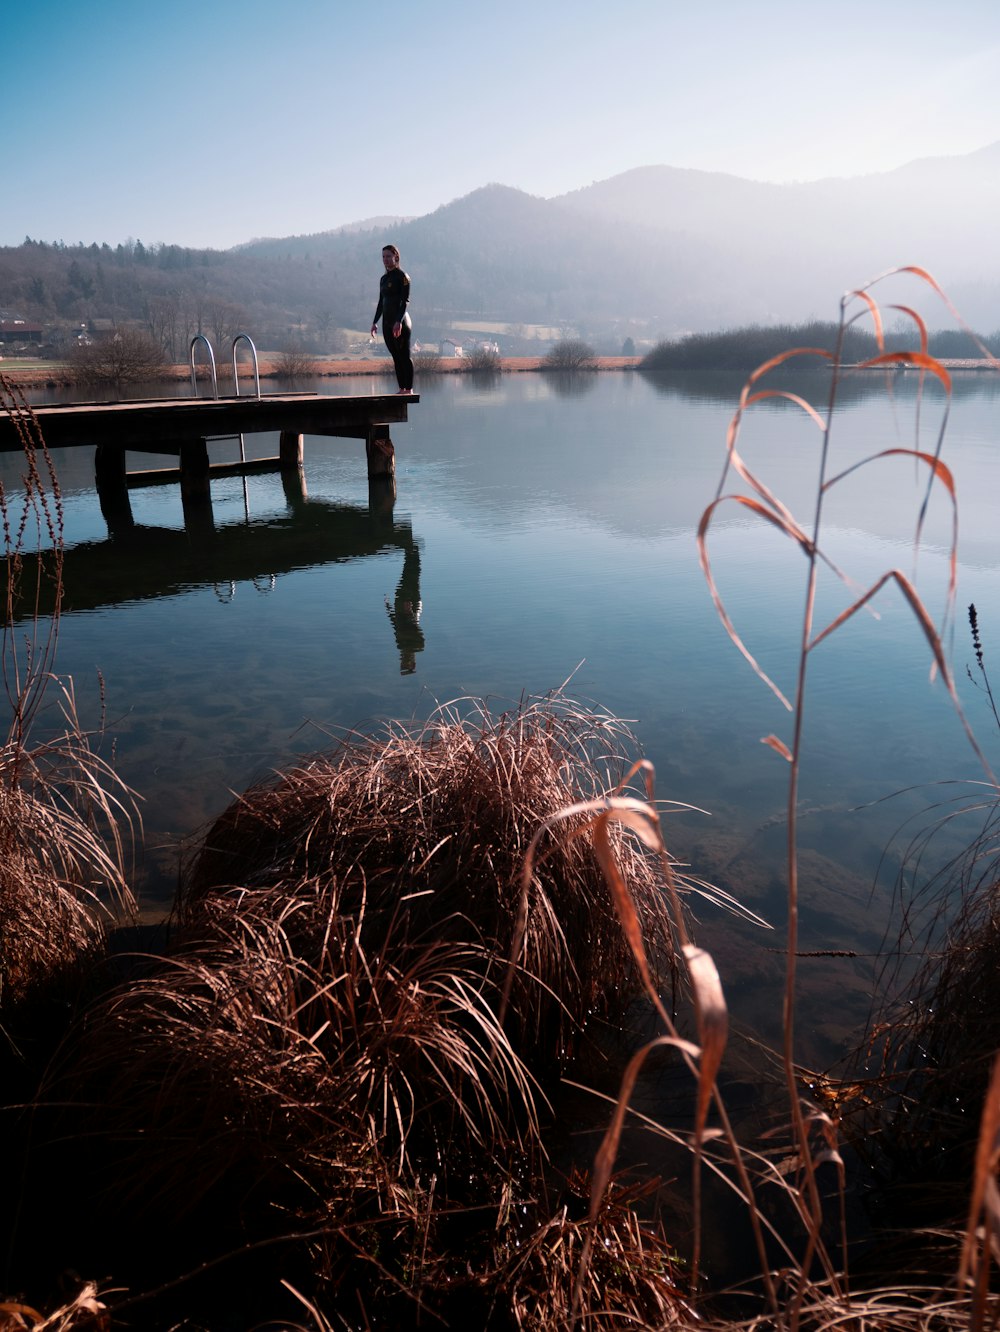 a person standing on a dock over a body of water